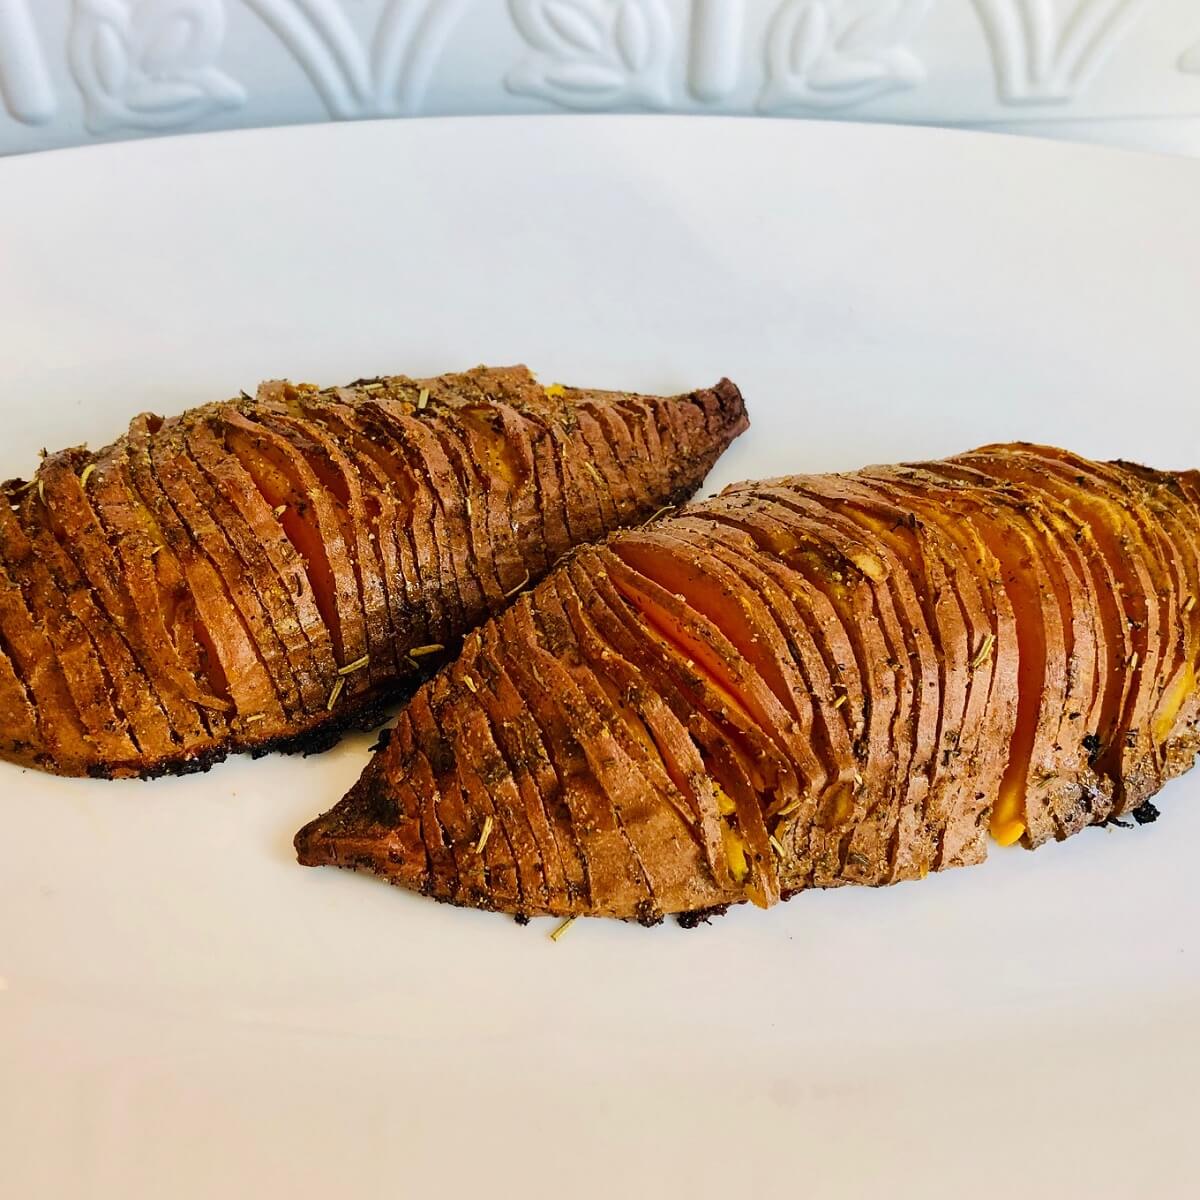 A white platter with two hasselback sweet potatoes with slits cut in them.